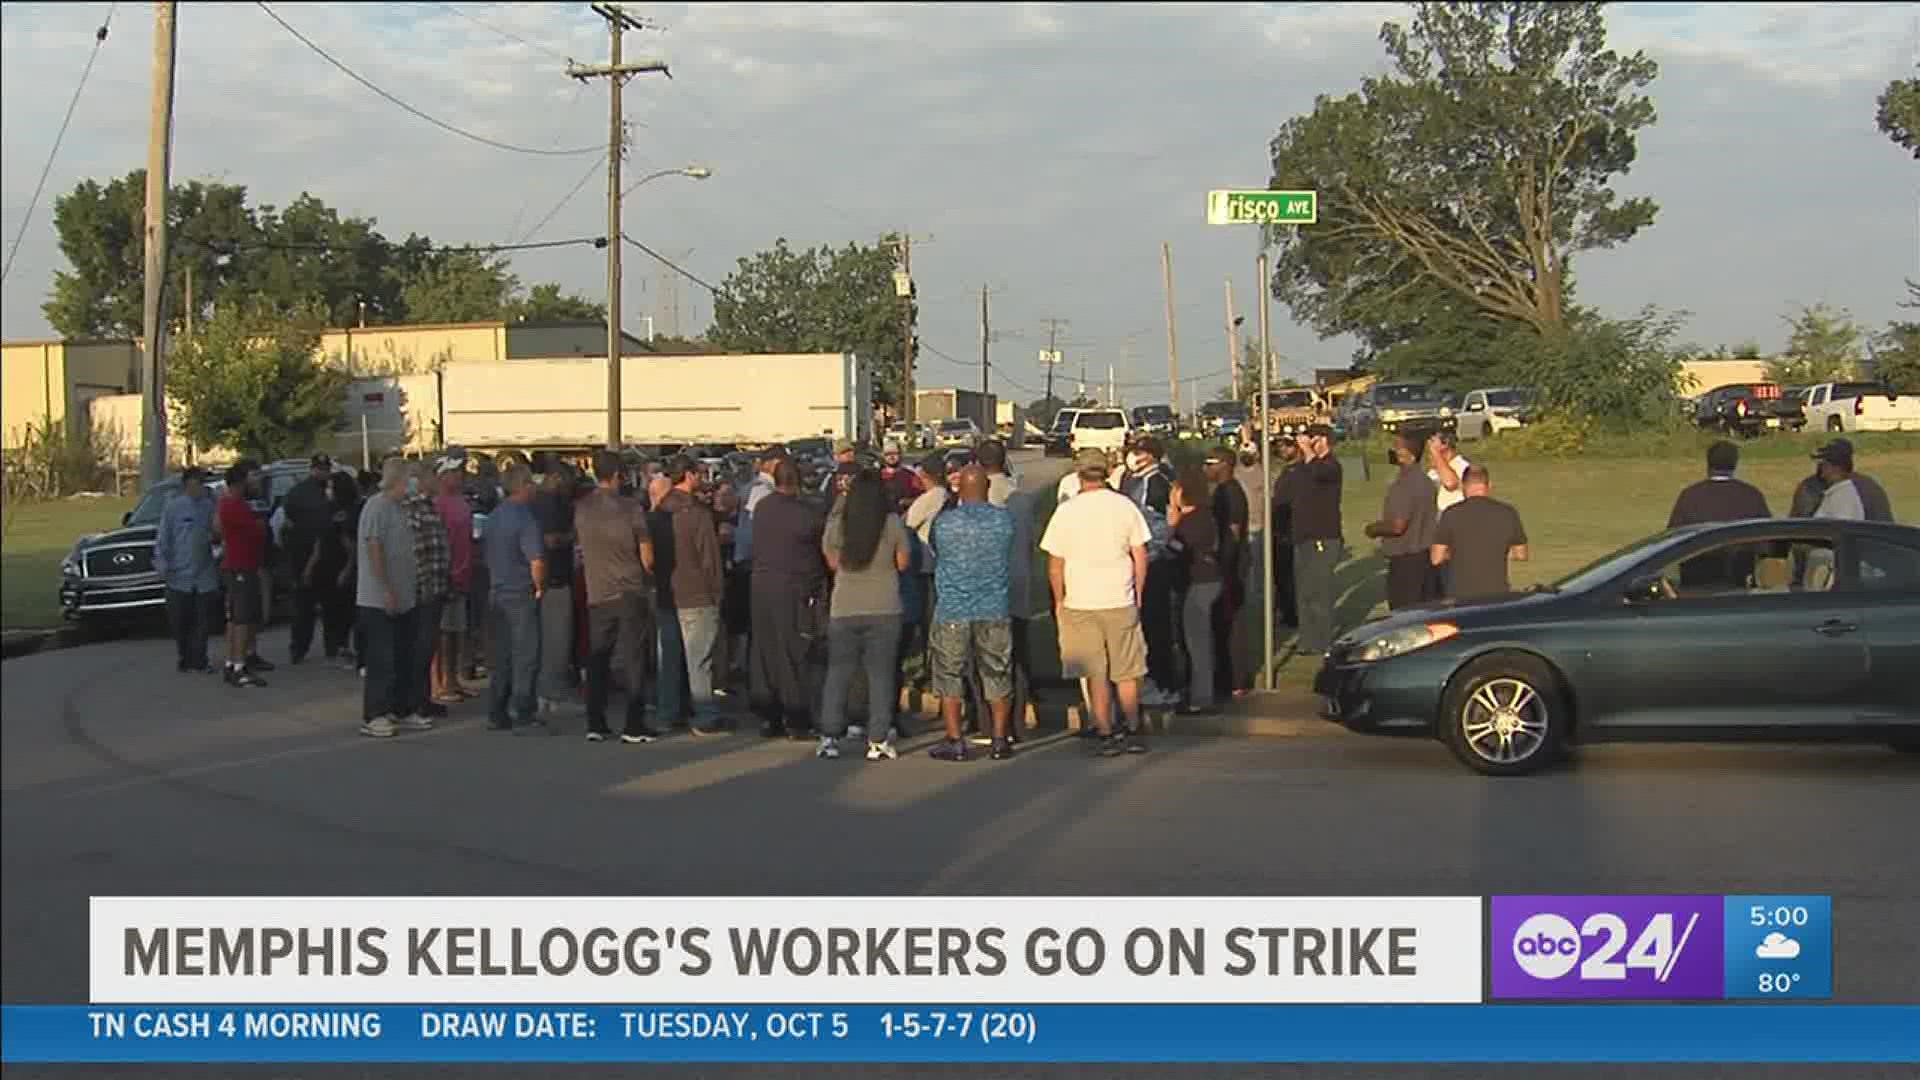 Picketing began Tuesday morning outside the plant on Airways Boulevard after contract talks between the union and management broke down in past week.